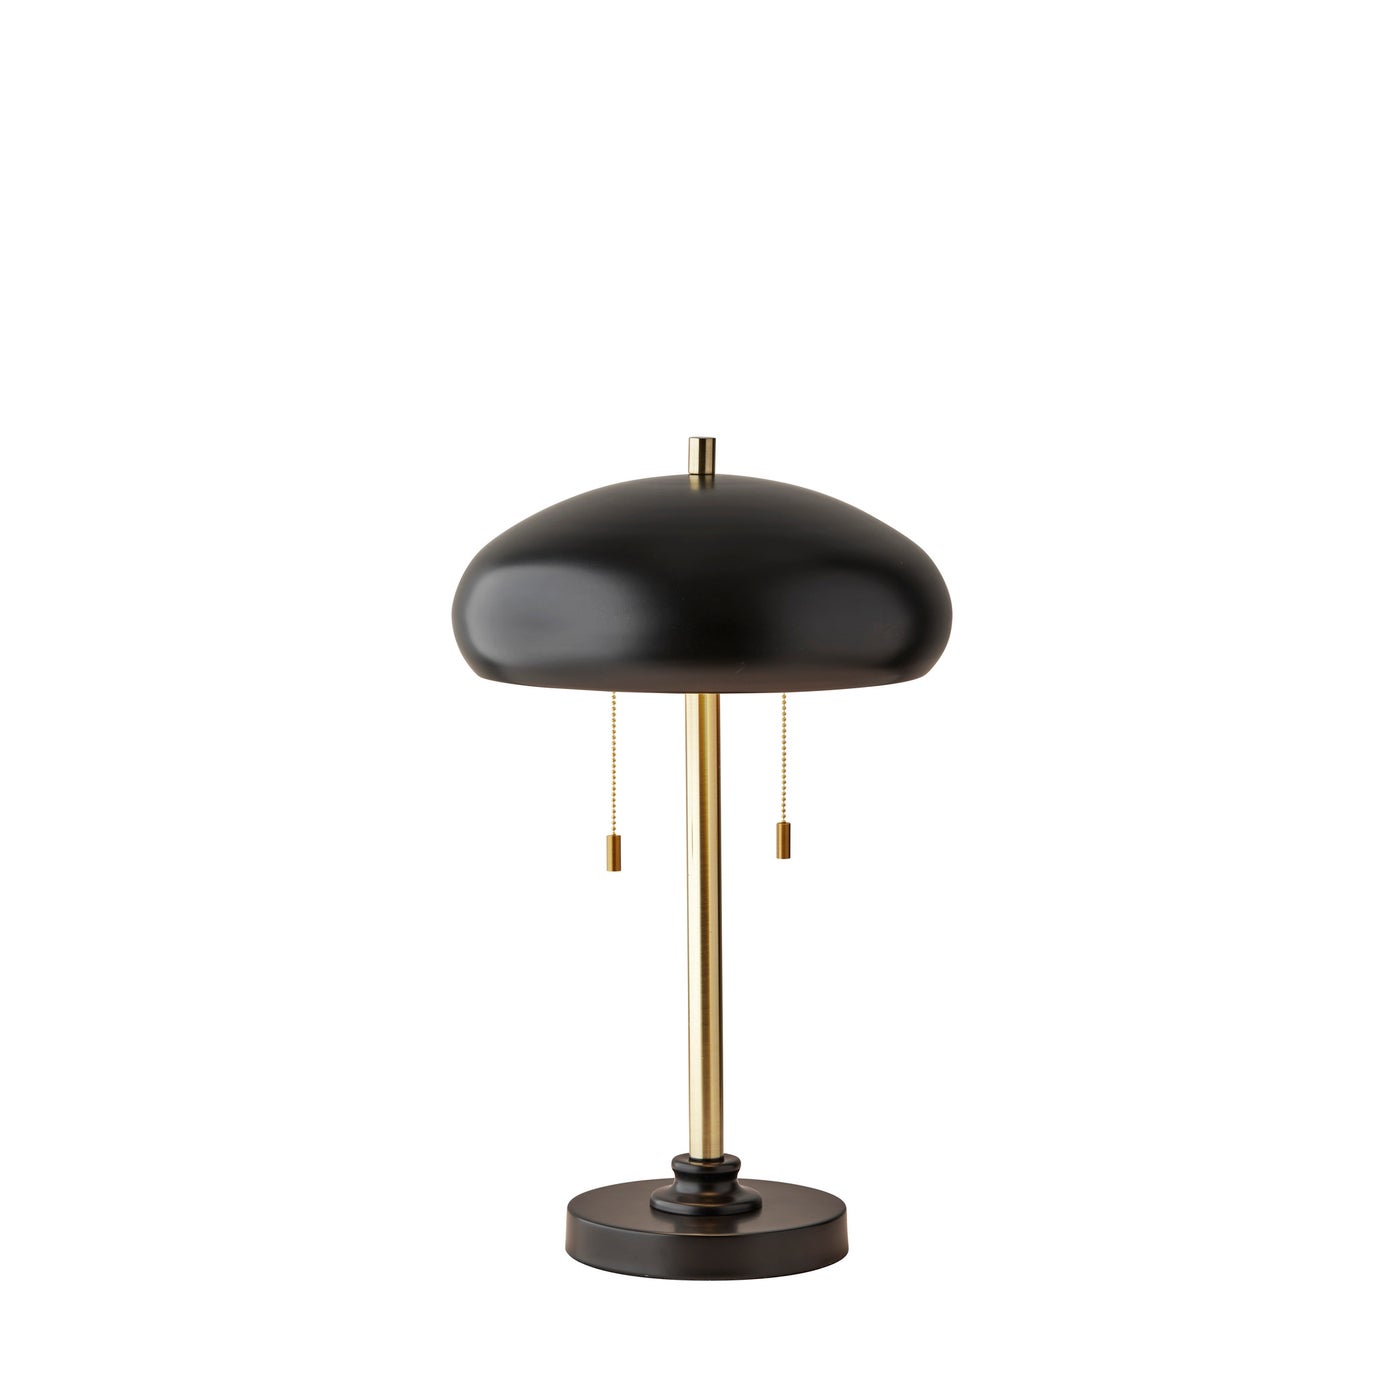 Adesso Home - 1562-21 - Two Light Table Lamp - Cap - Black & Antique Brass